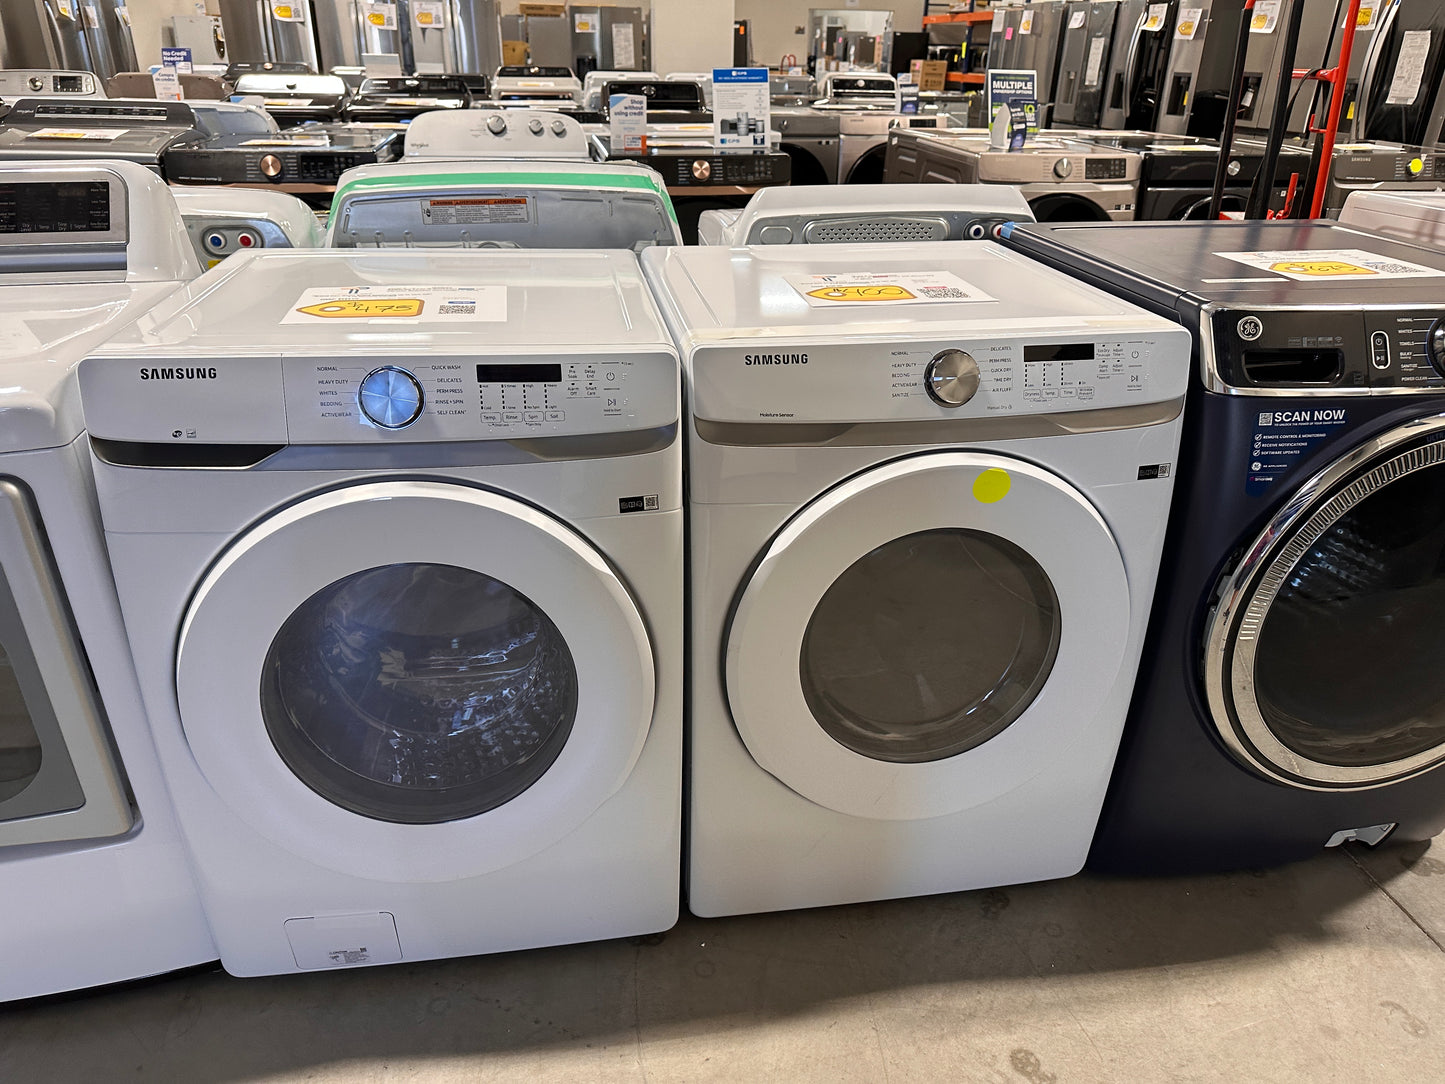 SALE PRICE STACKABLE SAMSUNG SMART LAUNDRY SET - FRONT LOAD WASHER ELECTRIC DRYER - WAS13152 DRY12460